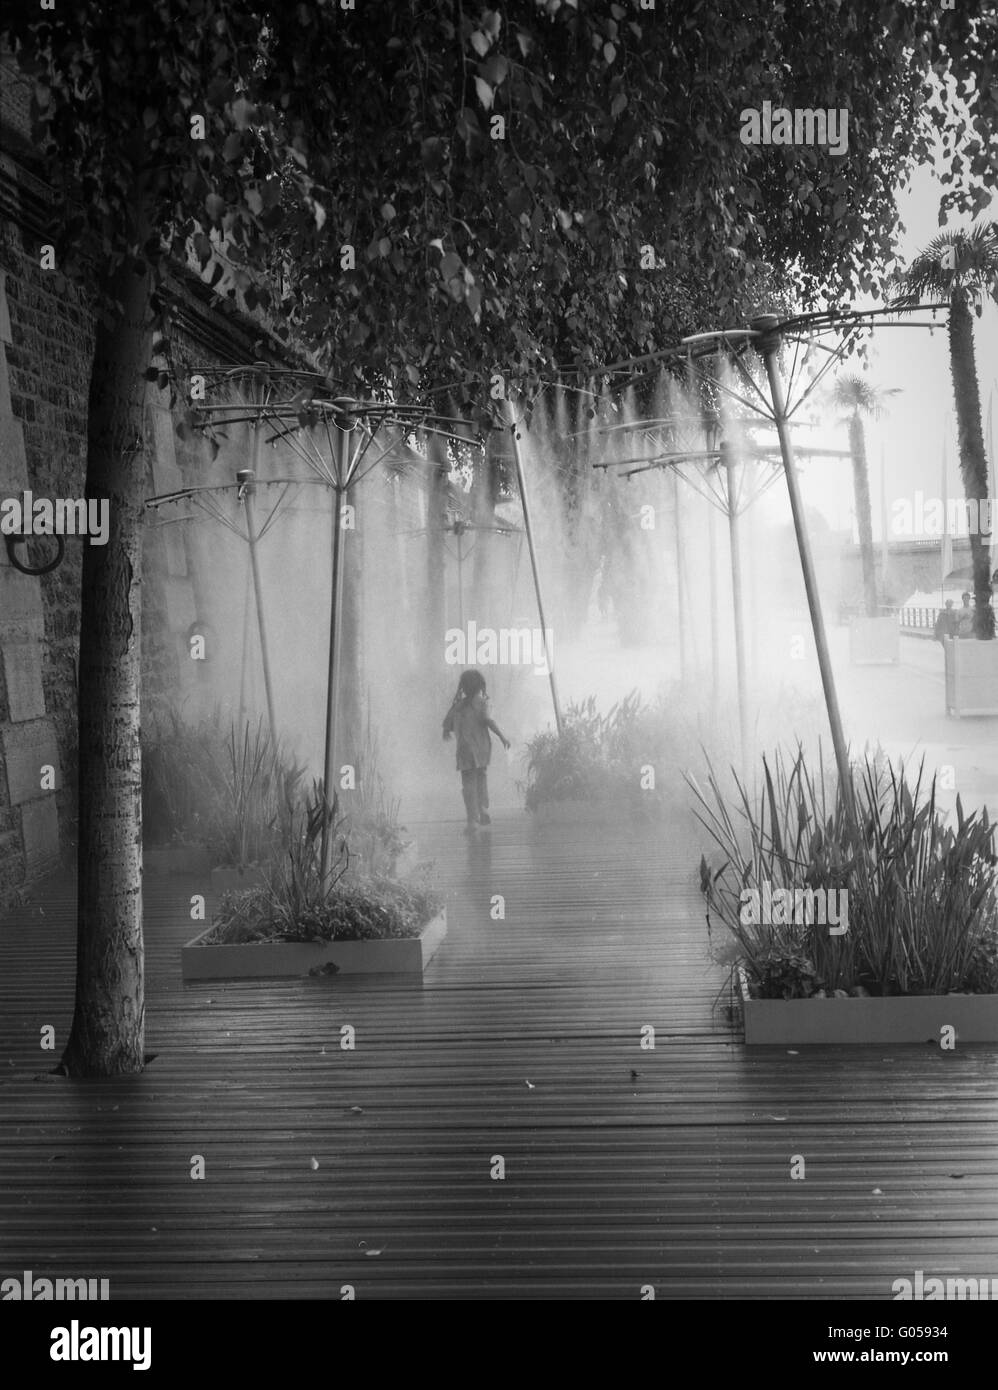 Young Girl Running Through Mist Sprinklers, River Stock Photo